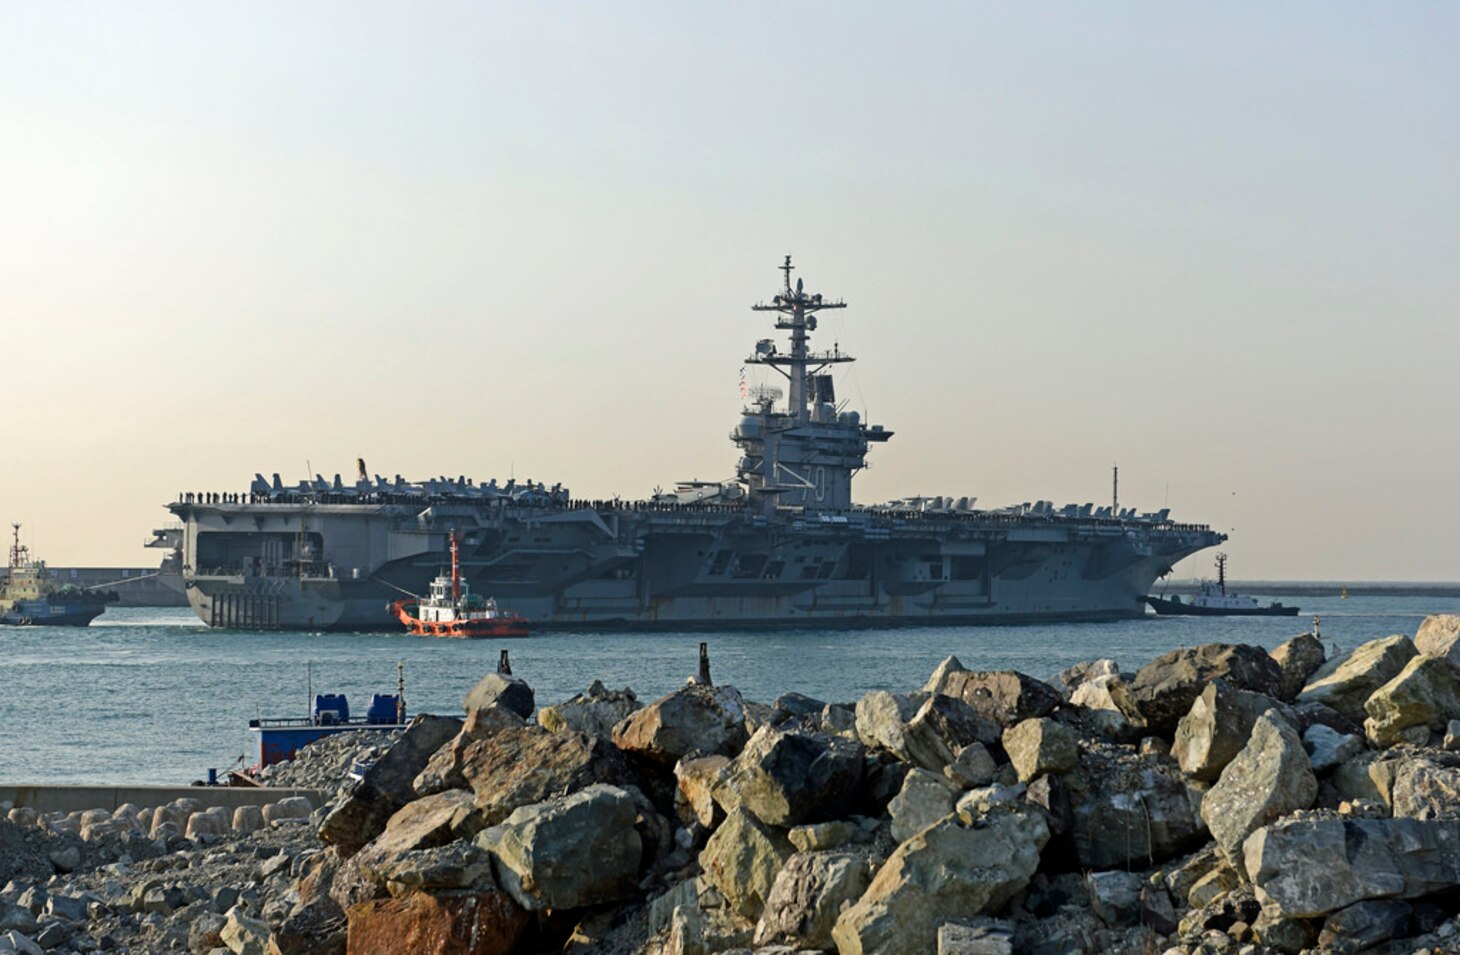 The aircraft carrier USS Carl Vinson (CVN 70) approaches the Republic of Korea (ROK) Fleet headquarters. The Carl Vinson Carrier Strike Group is on a regularly scheduled Western Pacific deployment as part of the U.S. Pacific Fleet-led initiative to extend the command and control functions of U.S. 3rd Fleet. 